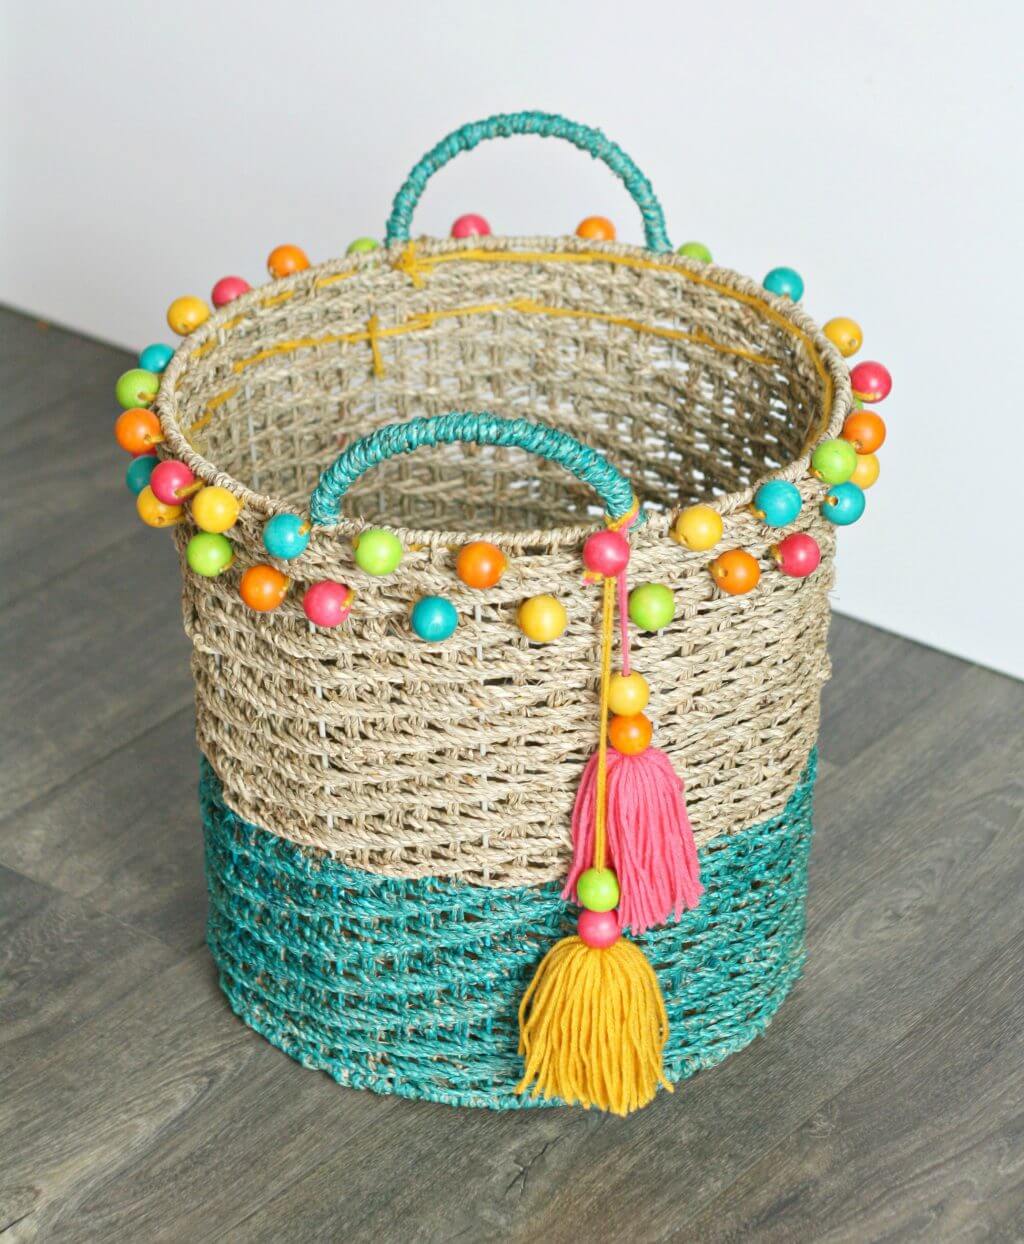 Using Bright Colors to Rejuvenate Your Baskets